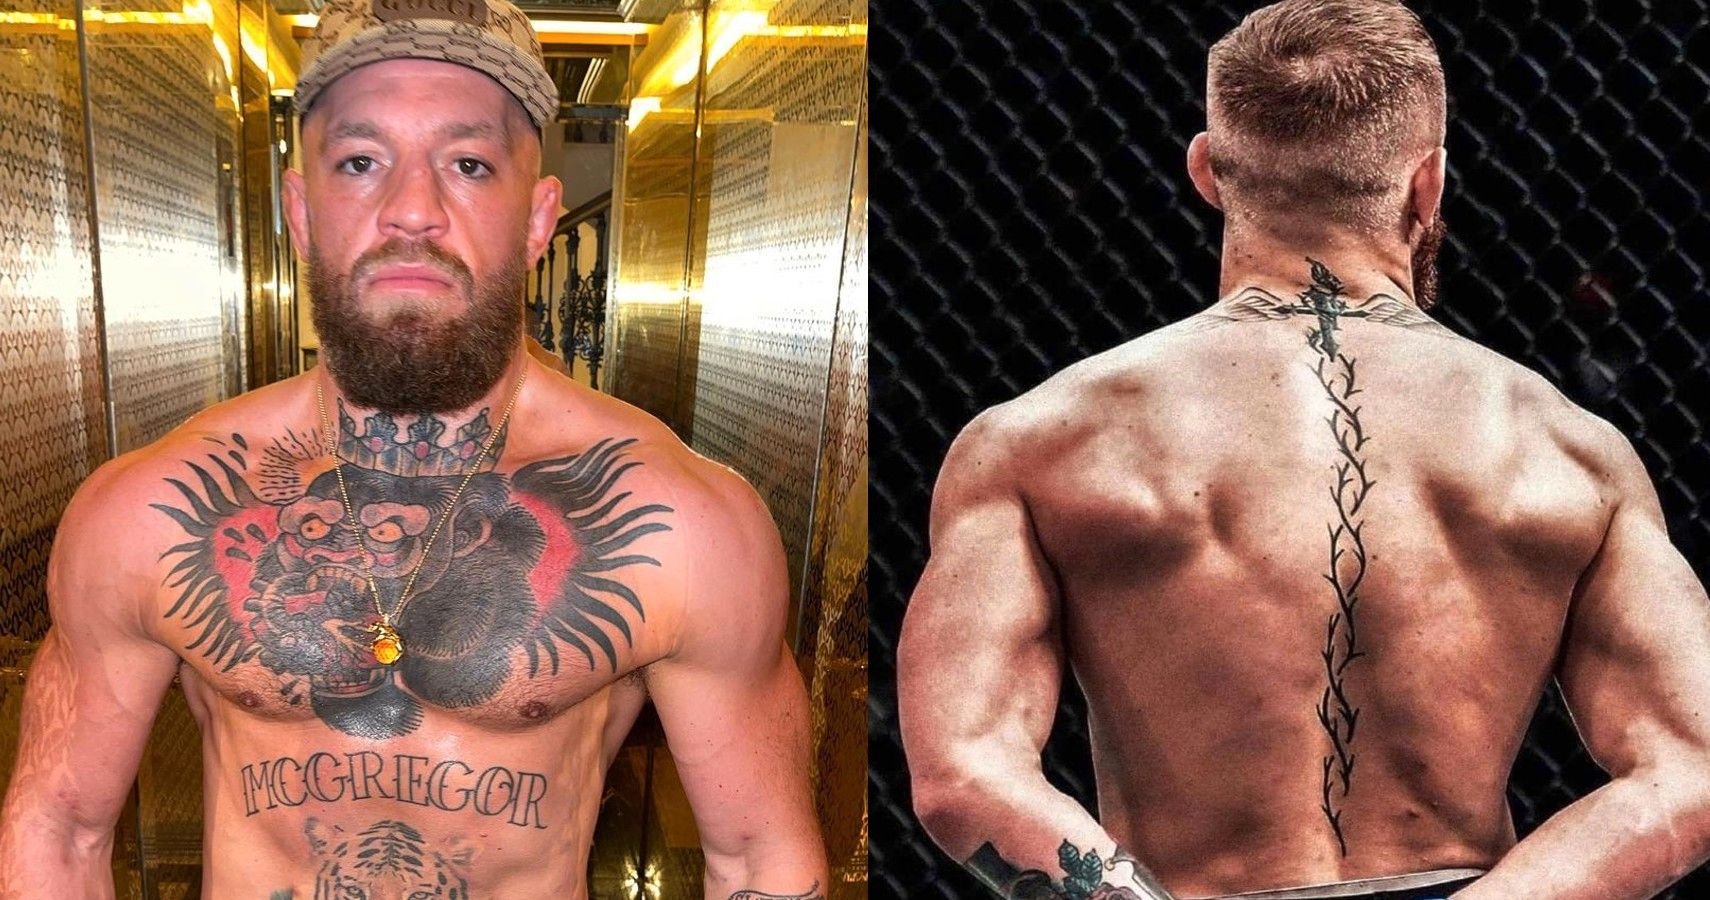 From A Plumber To A Sports Legend: The Incredible Story Of Conor McGregor